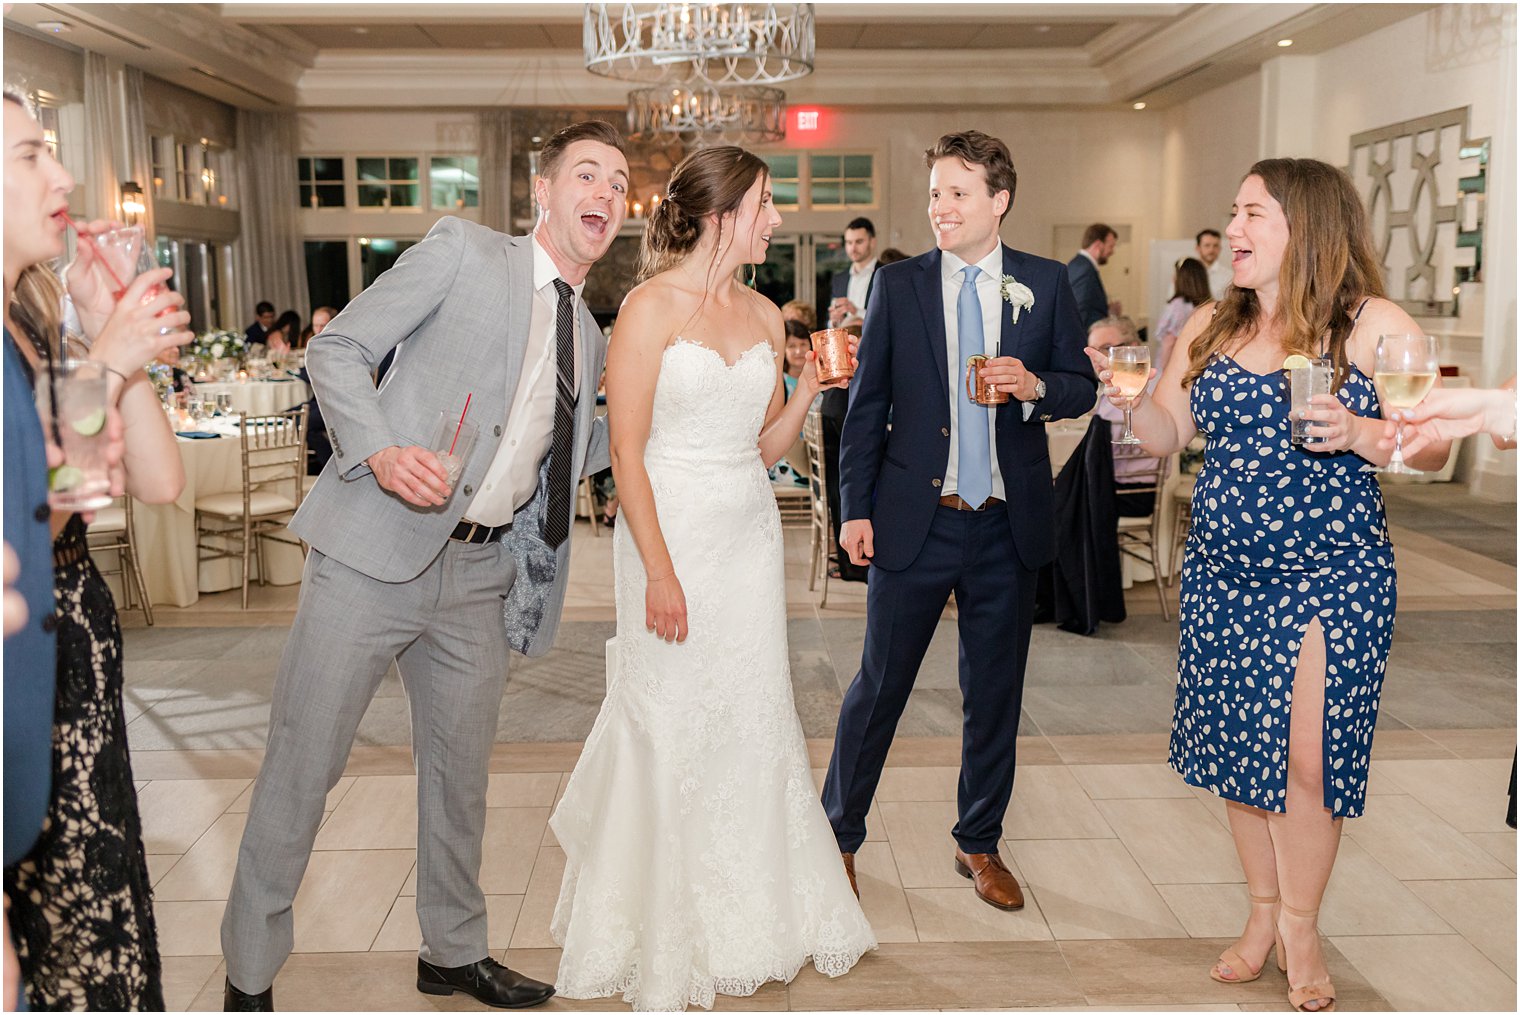 guests dance with bride and groom in NJ wedding reception